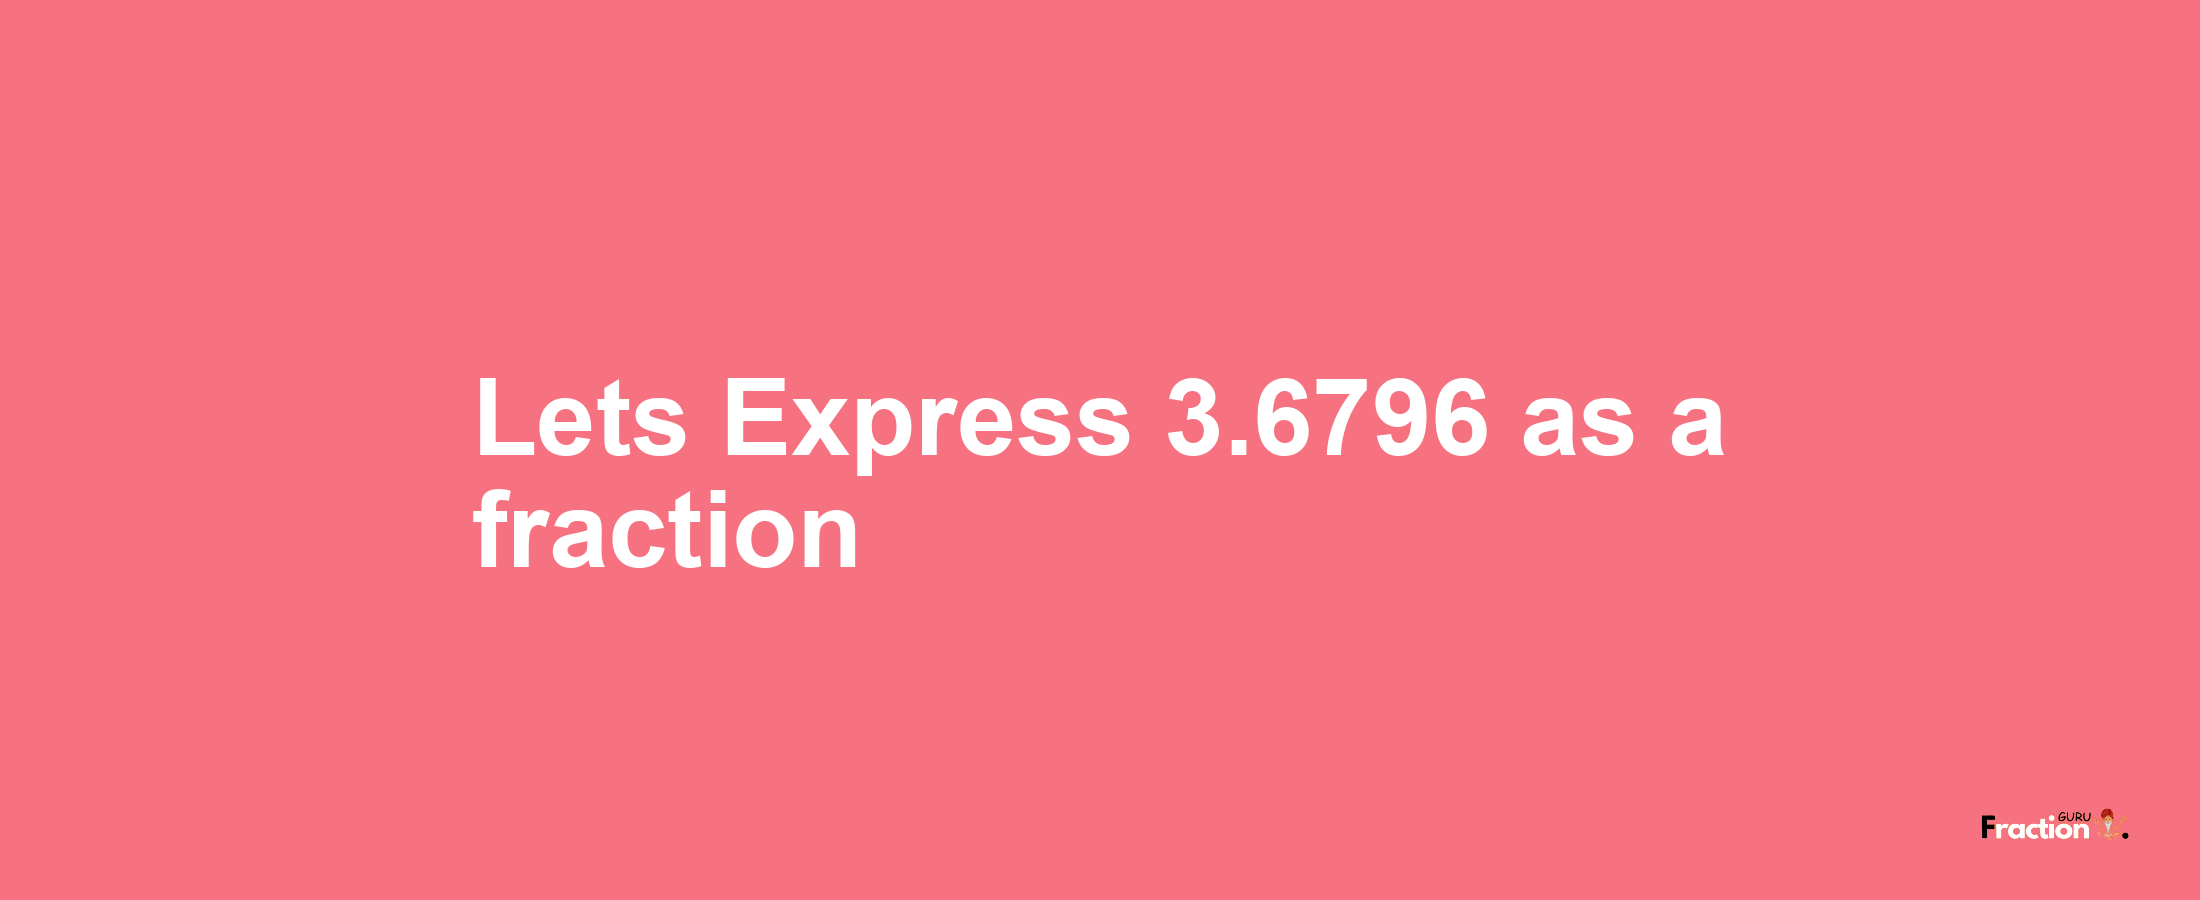 Lets Express 3.6796 as afraction